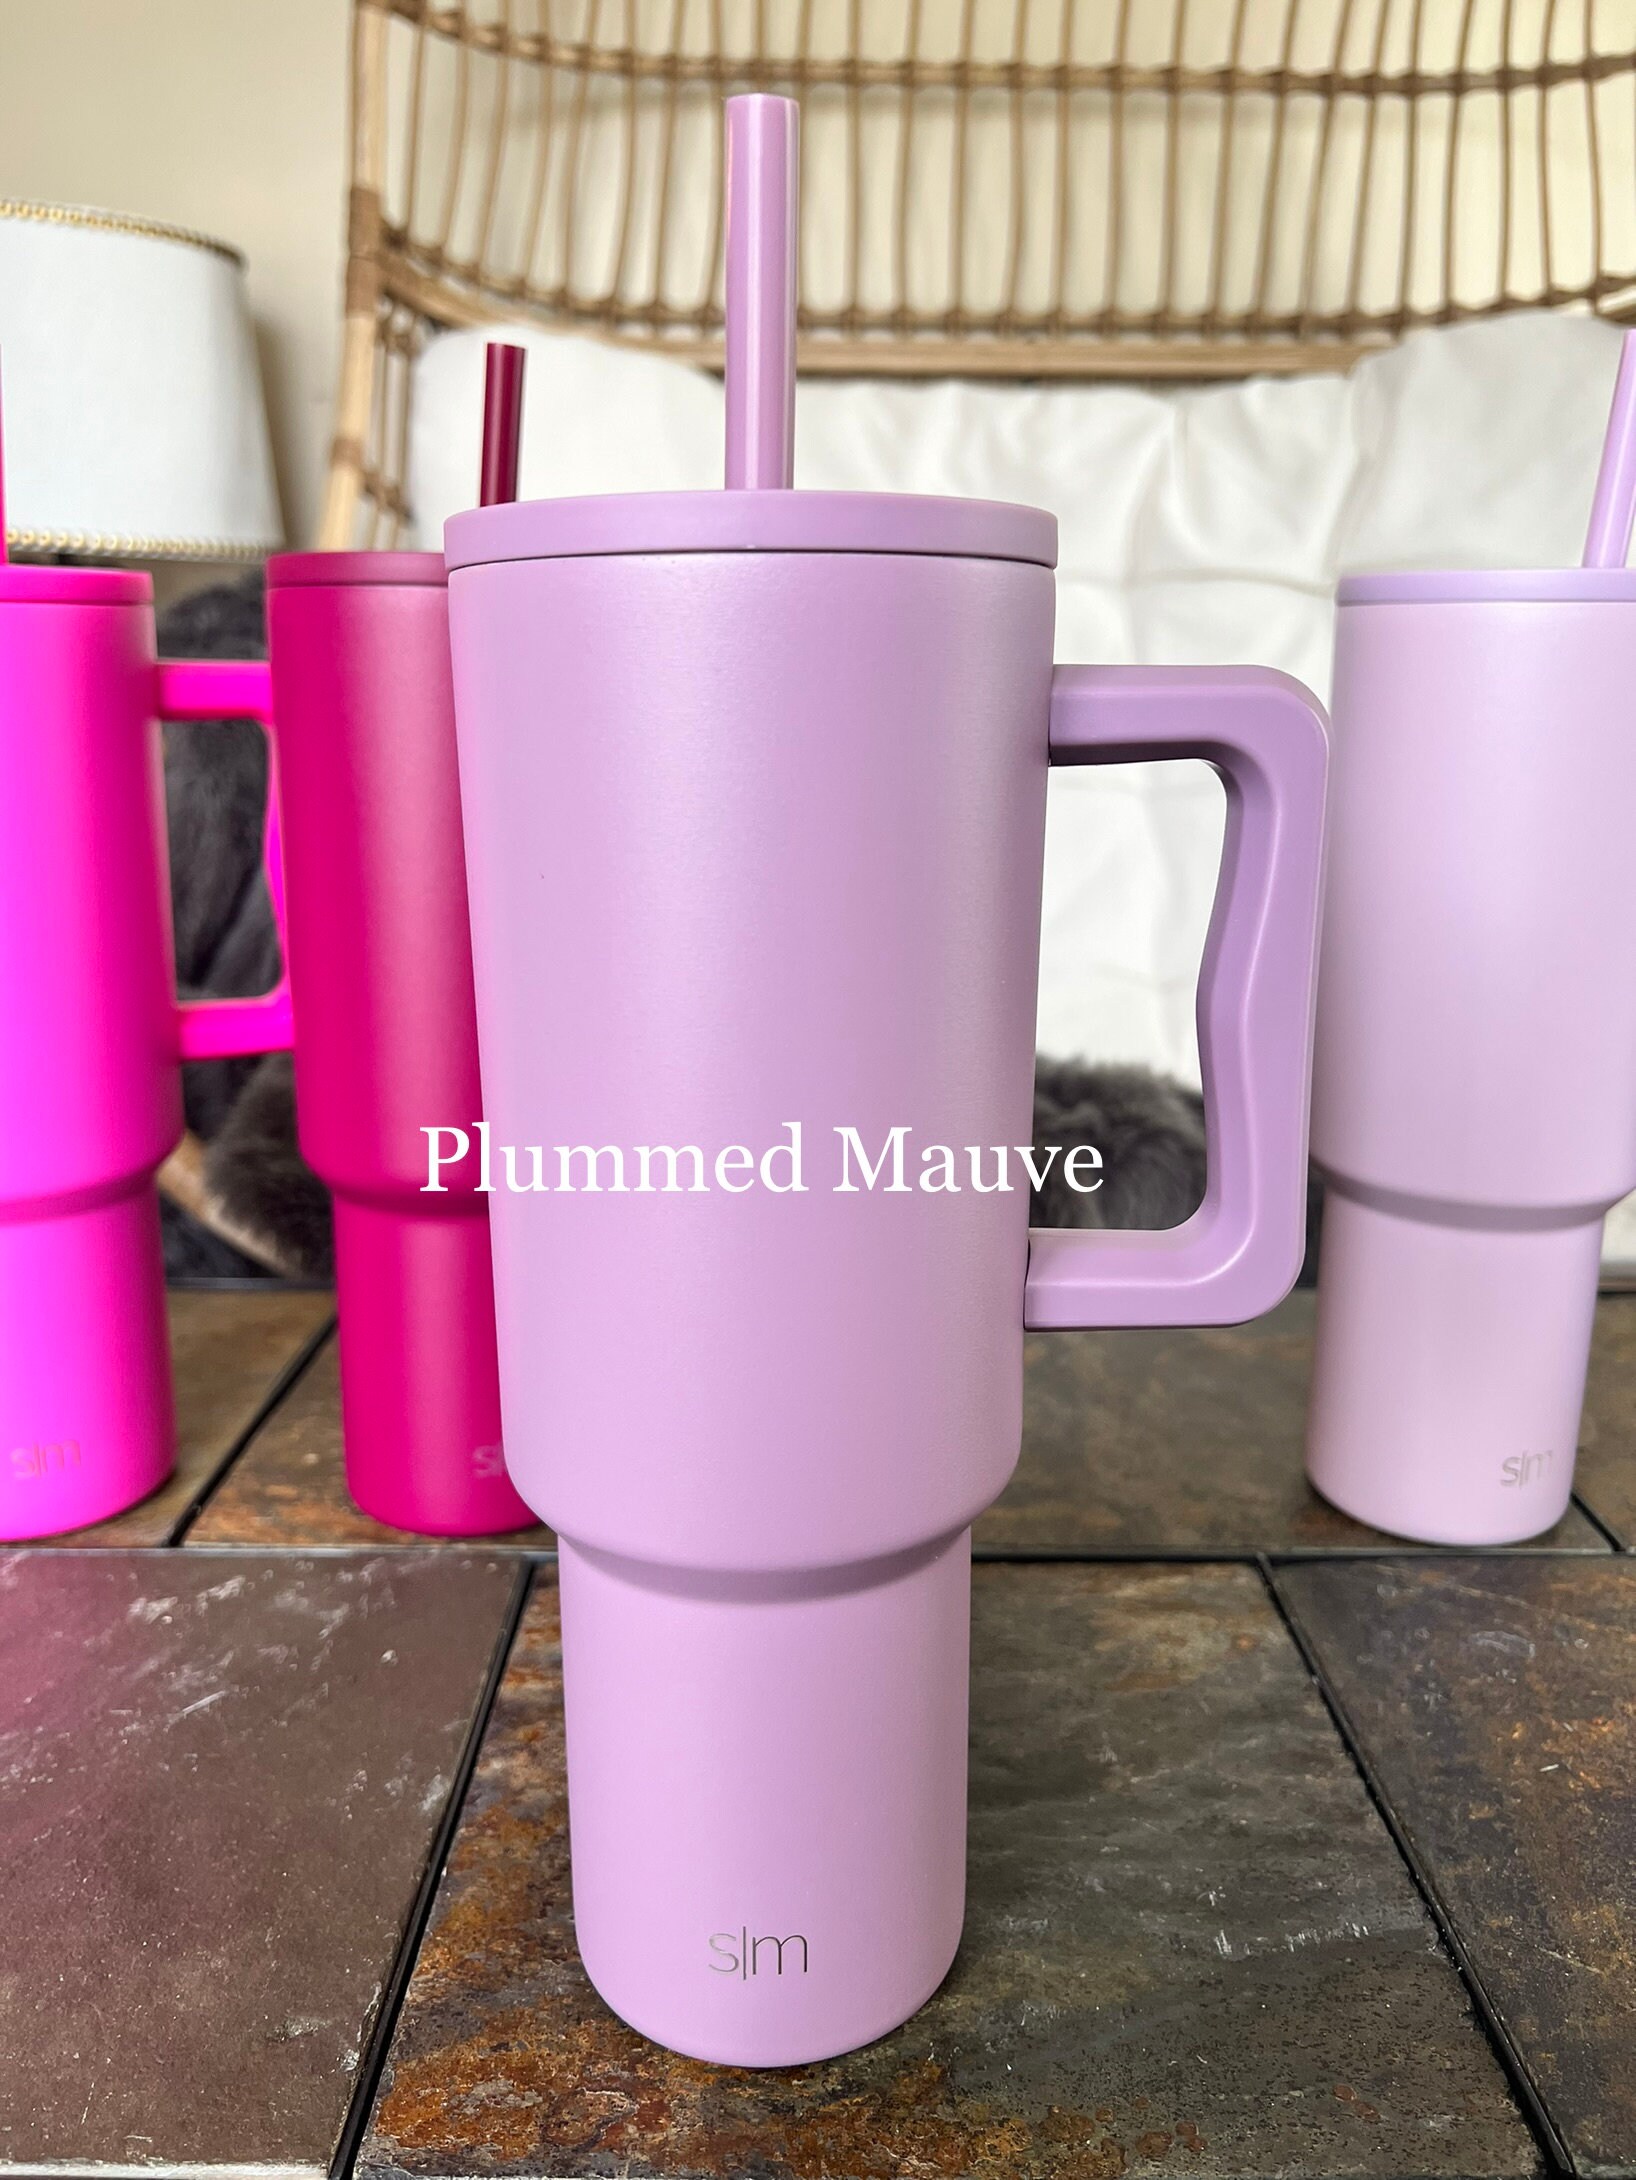 Simple Modern 40 oz Tumbler with Handle and Straw Lid | Insulated Stainless Steel Water Bottle Stanley Cupholder Use |Trek | 40oz | Orchid Sangria